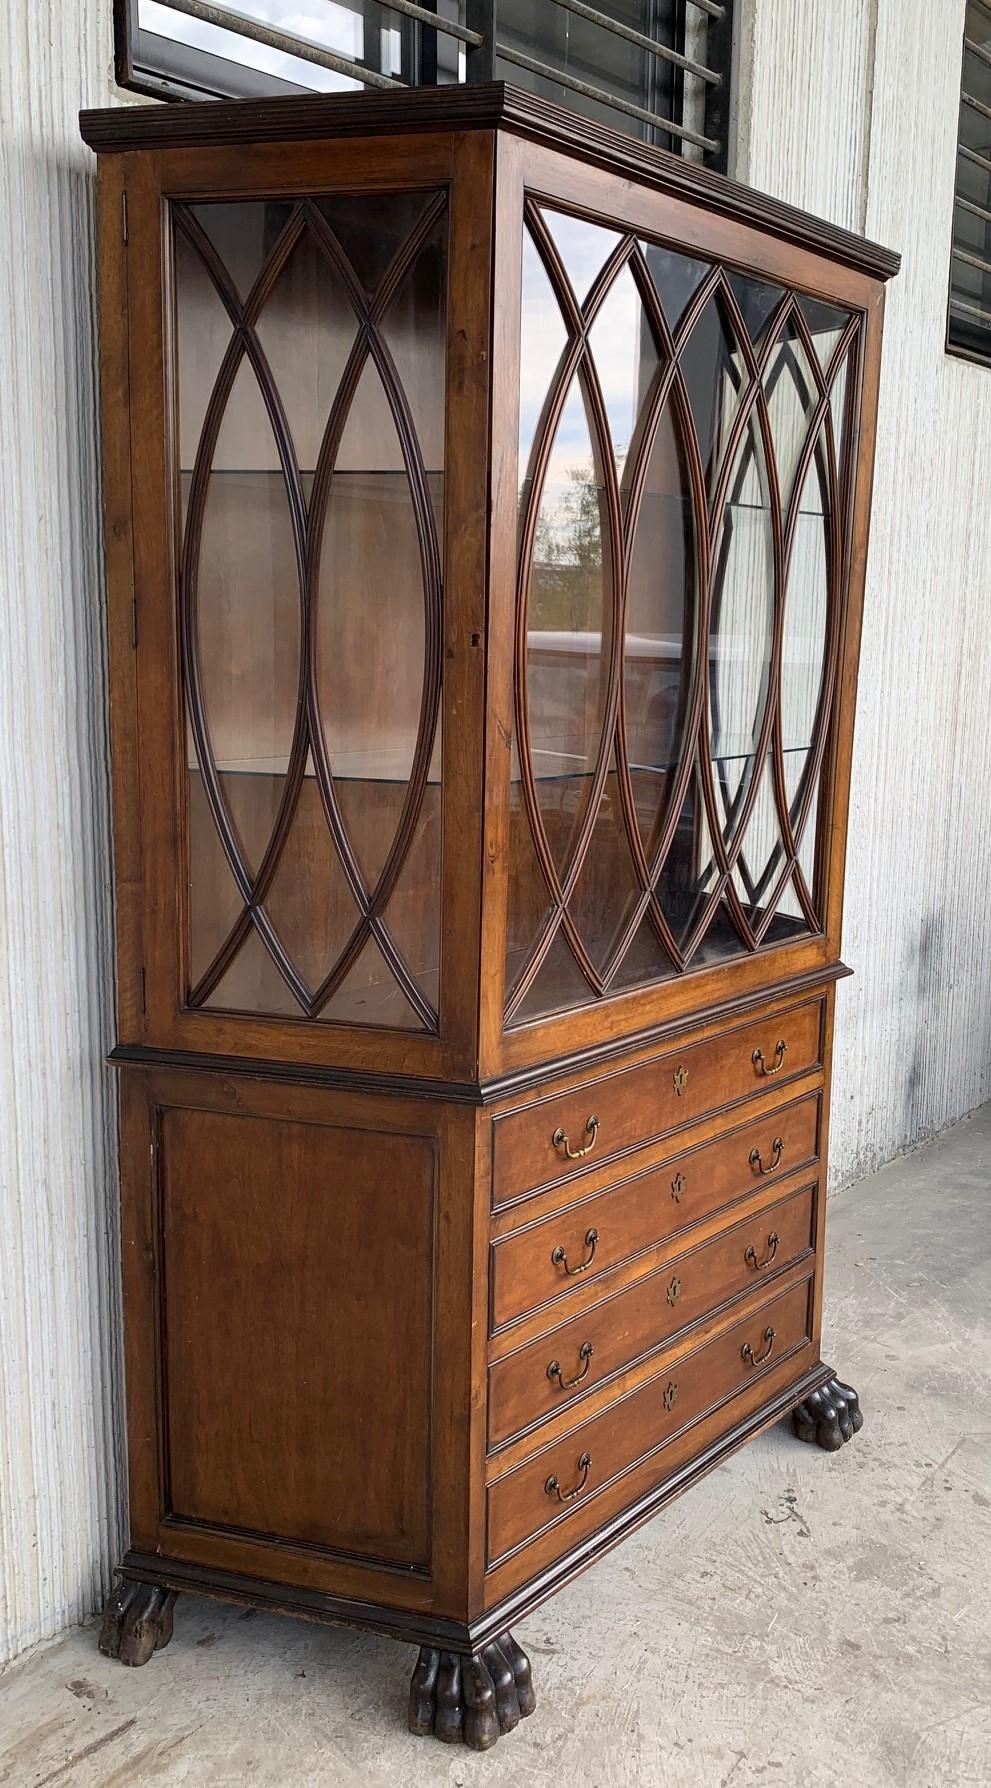 20th Century French Art Nouveau Fruitwood Wooden Showcase Vitrine with Four Drawers For Sale